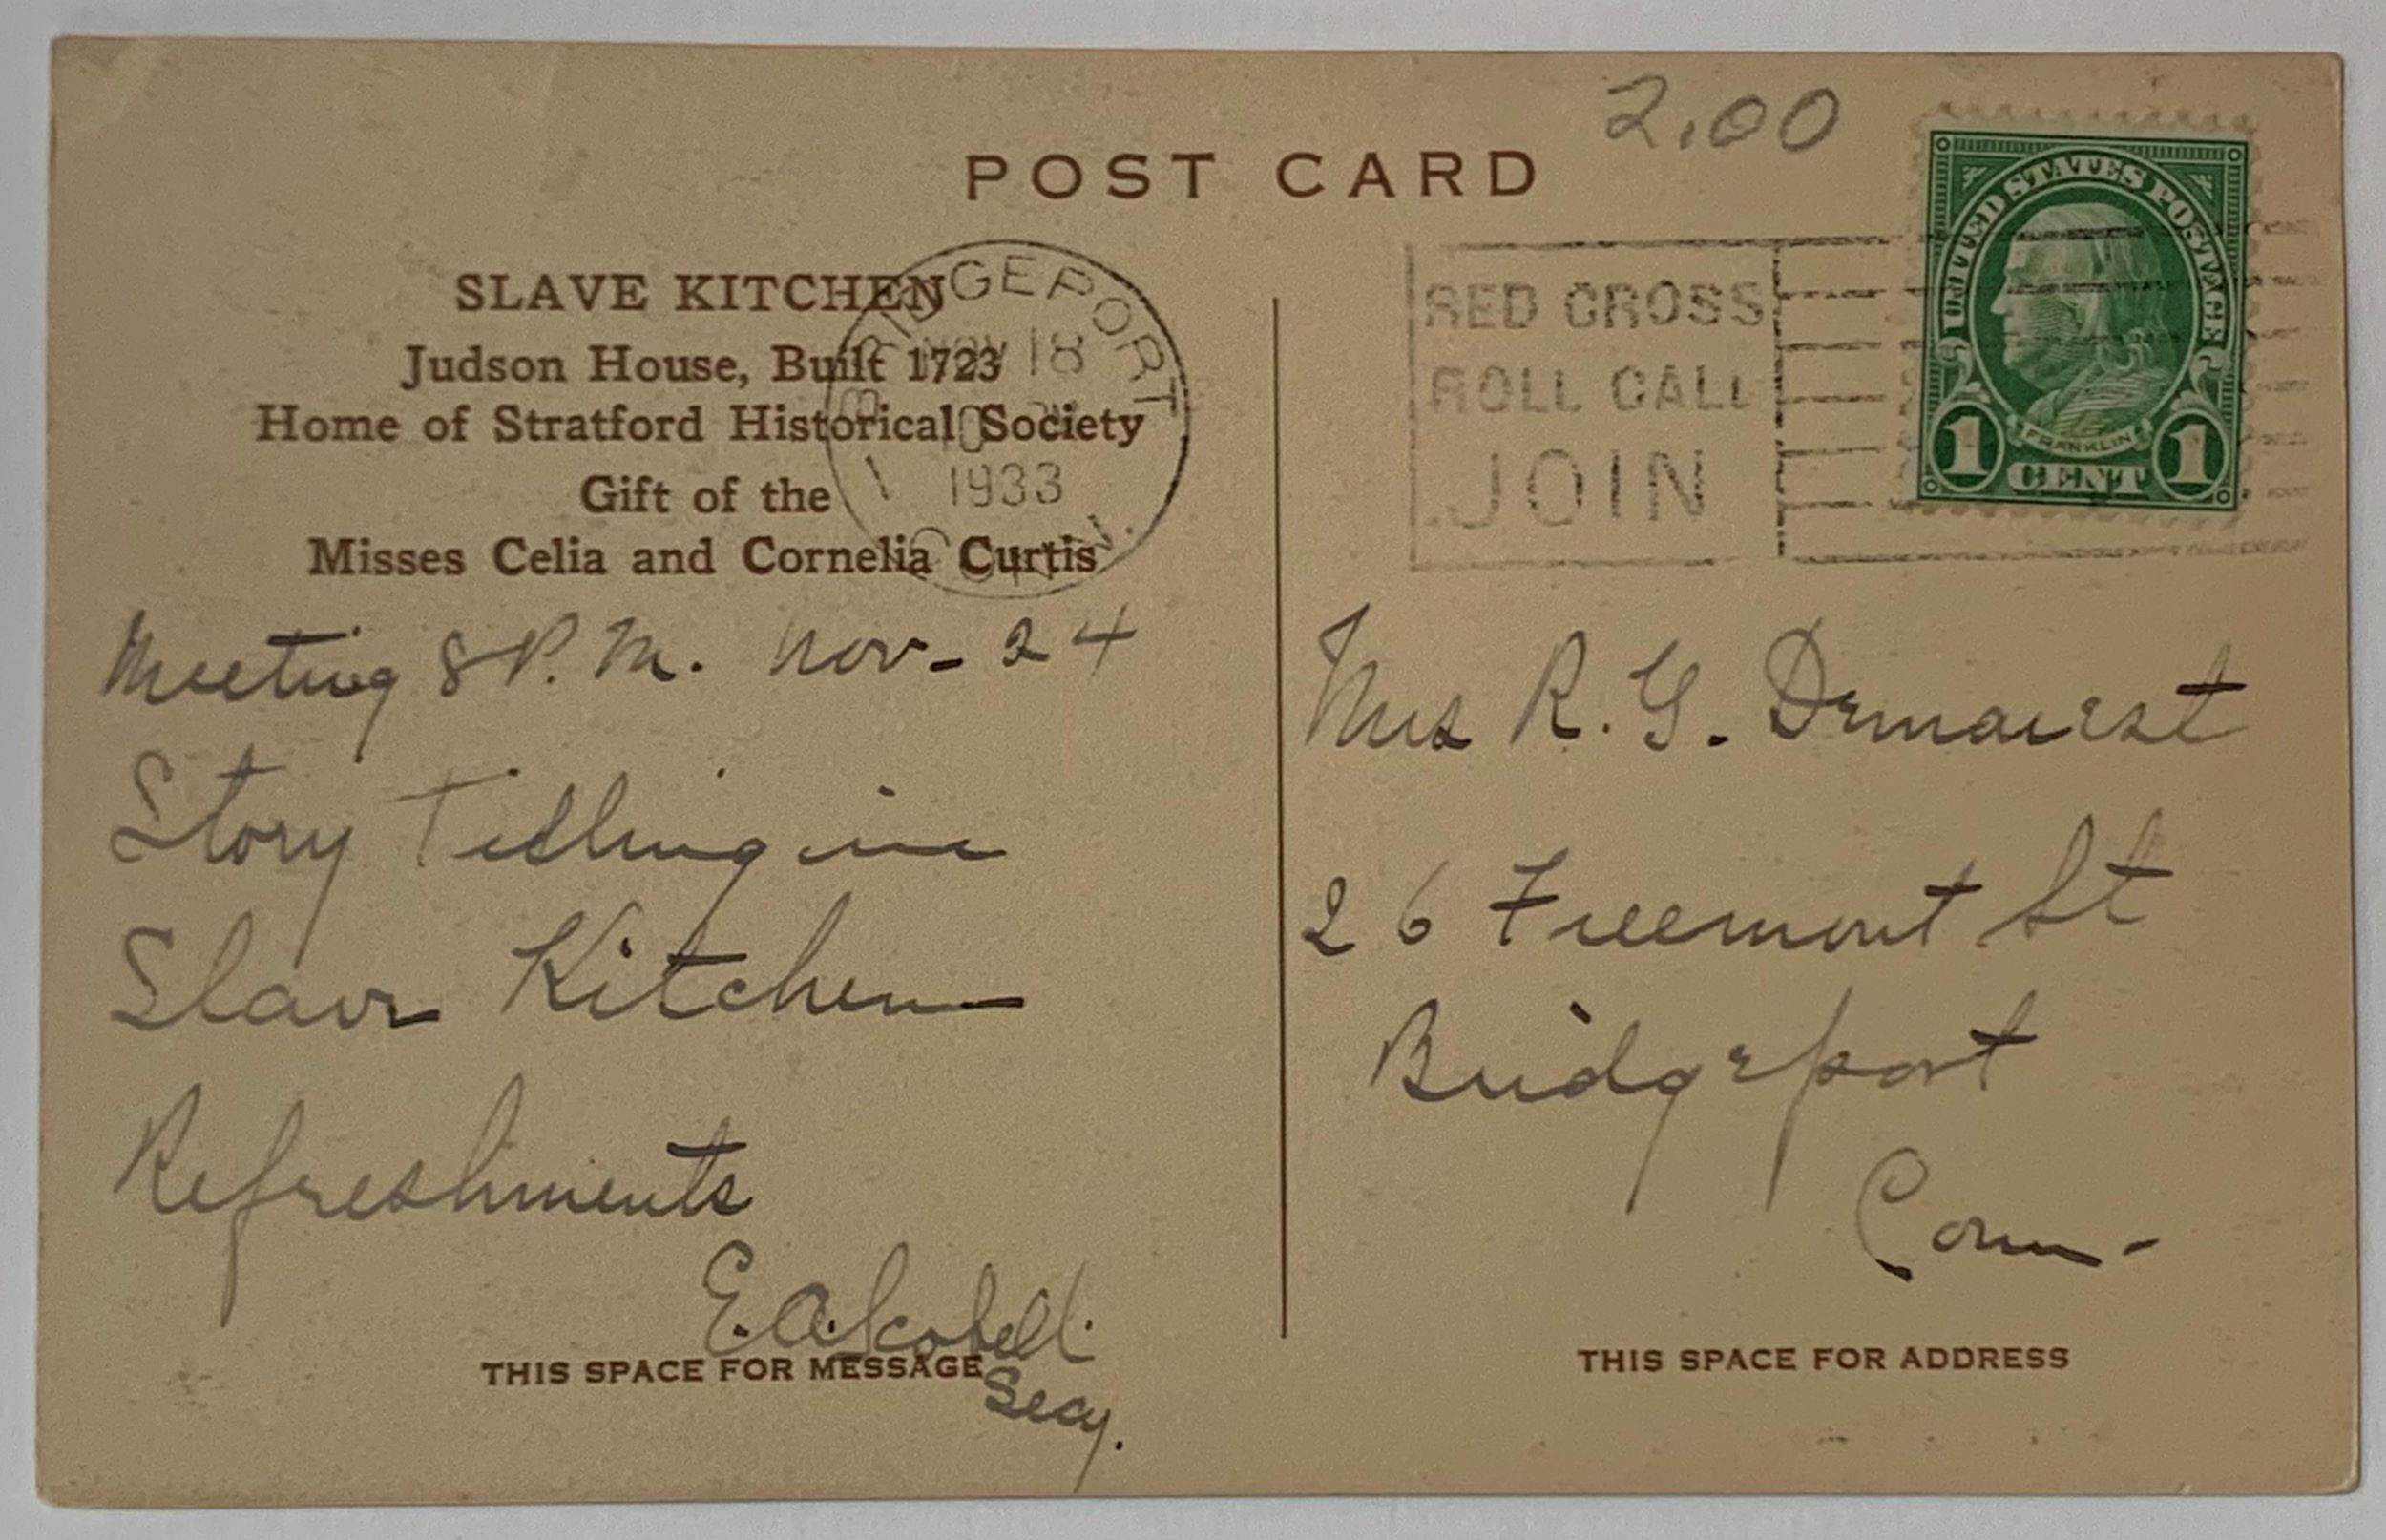 Message side of a postcard; the printed information identifies the subject as the "Slave Kitchen" of the Judson House, Stratford Historical Society